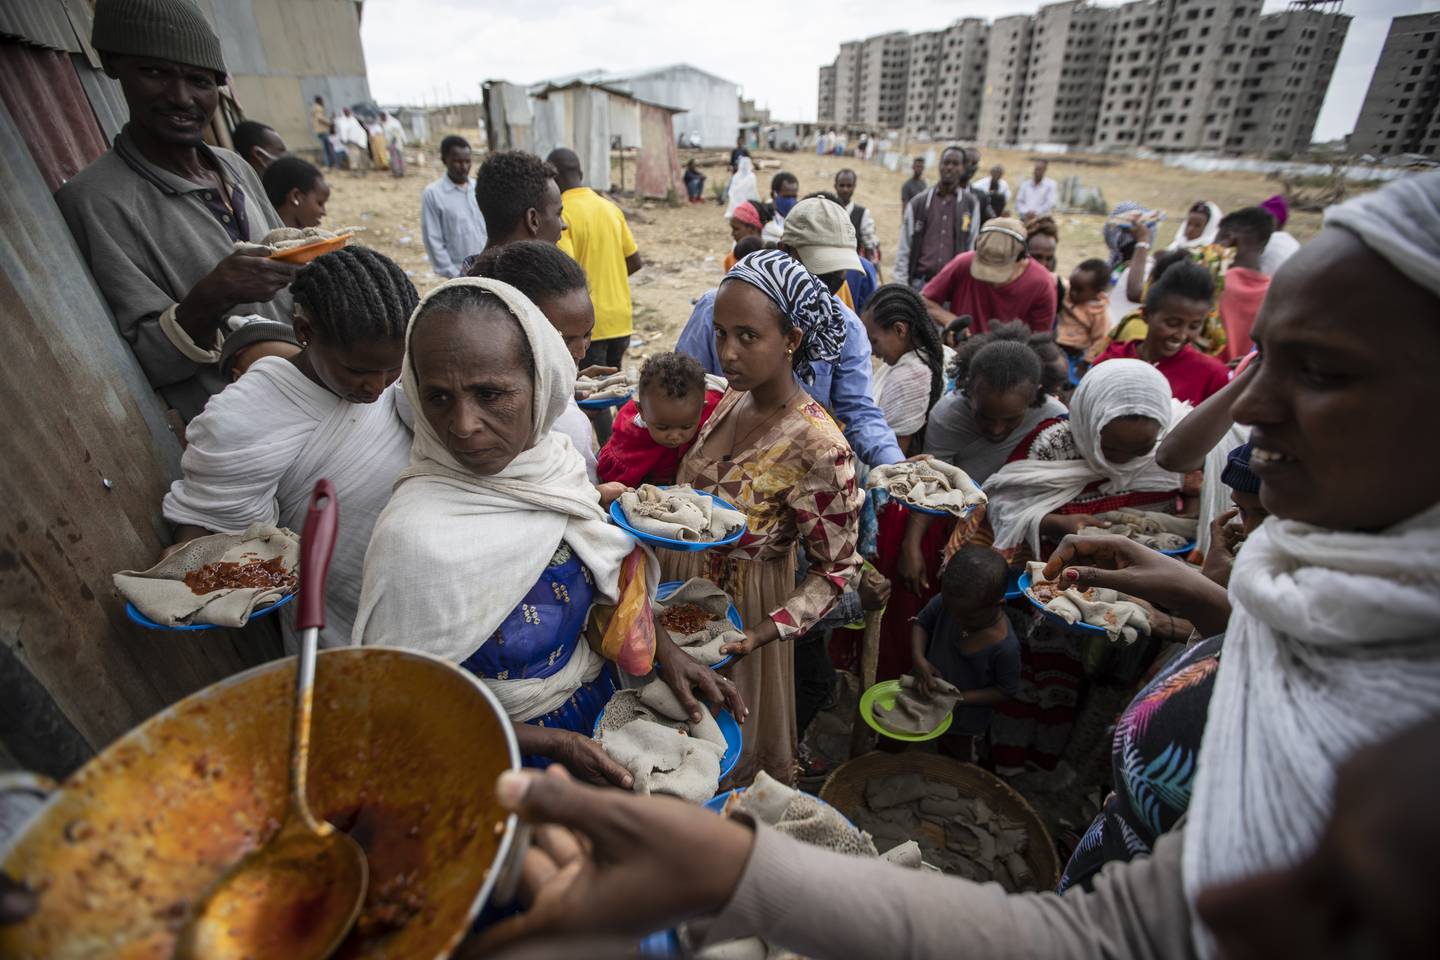 Displaced Tigrayans wait for food donated by local residents at a reception centre for the internally displaced in Mekele, in the Tigray region of northern Ethiopia. AP Photo